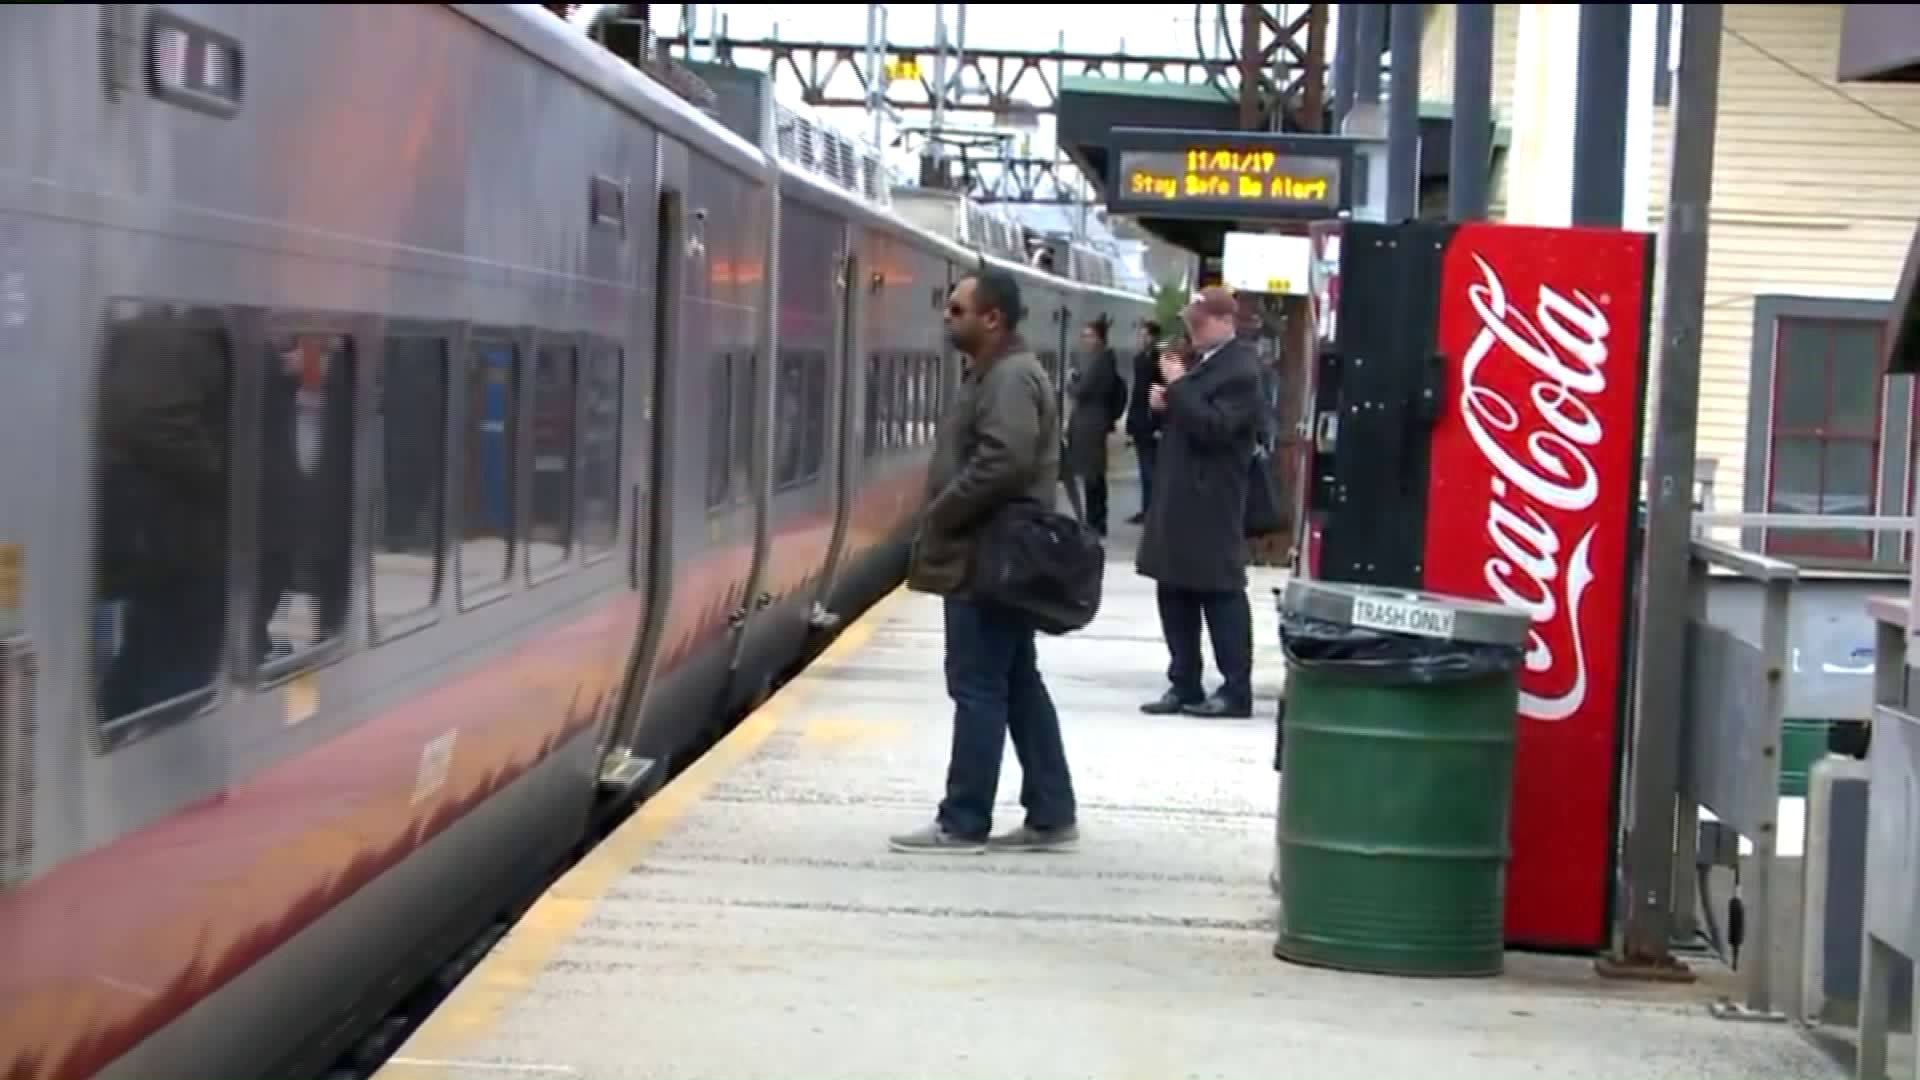 CT commuters react to NYC attack